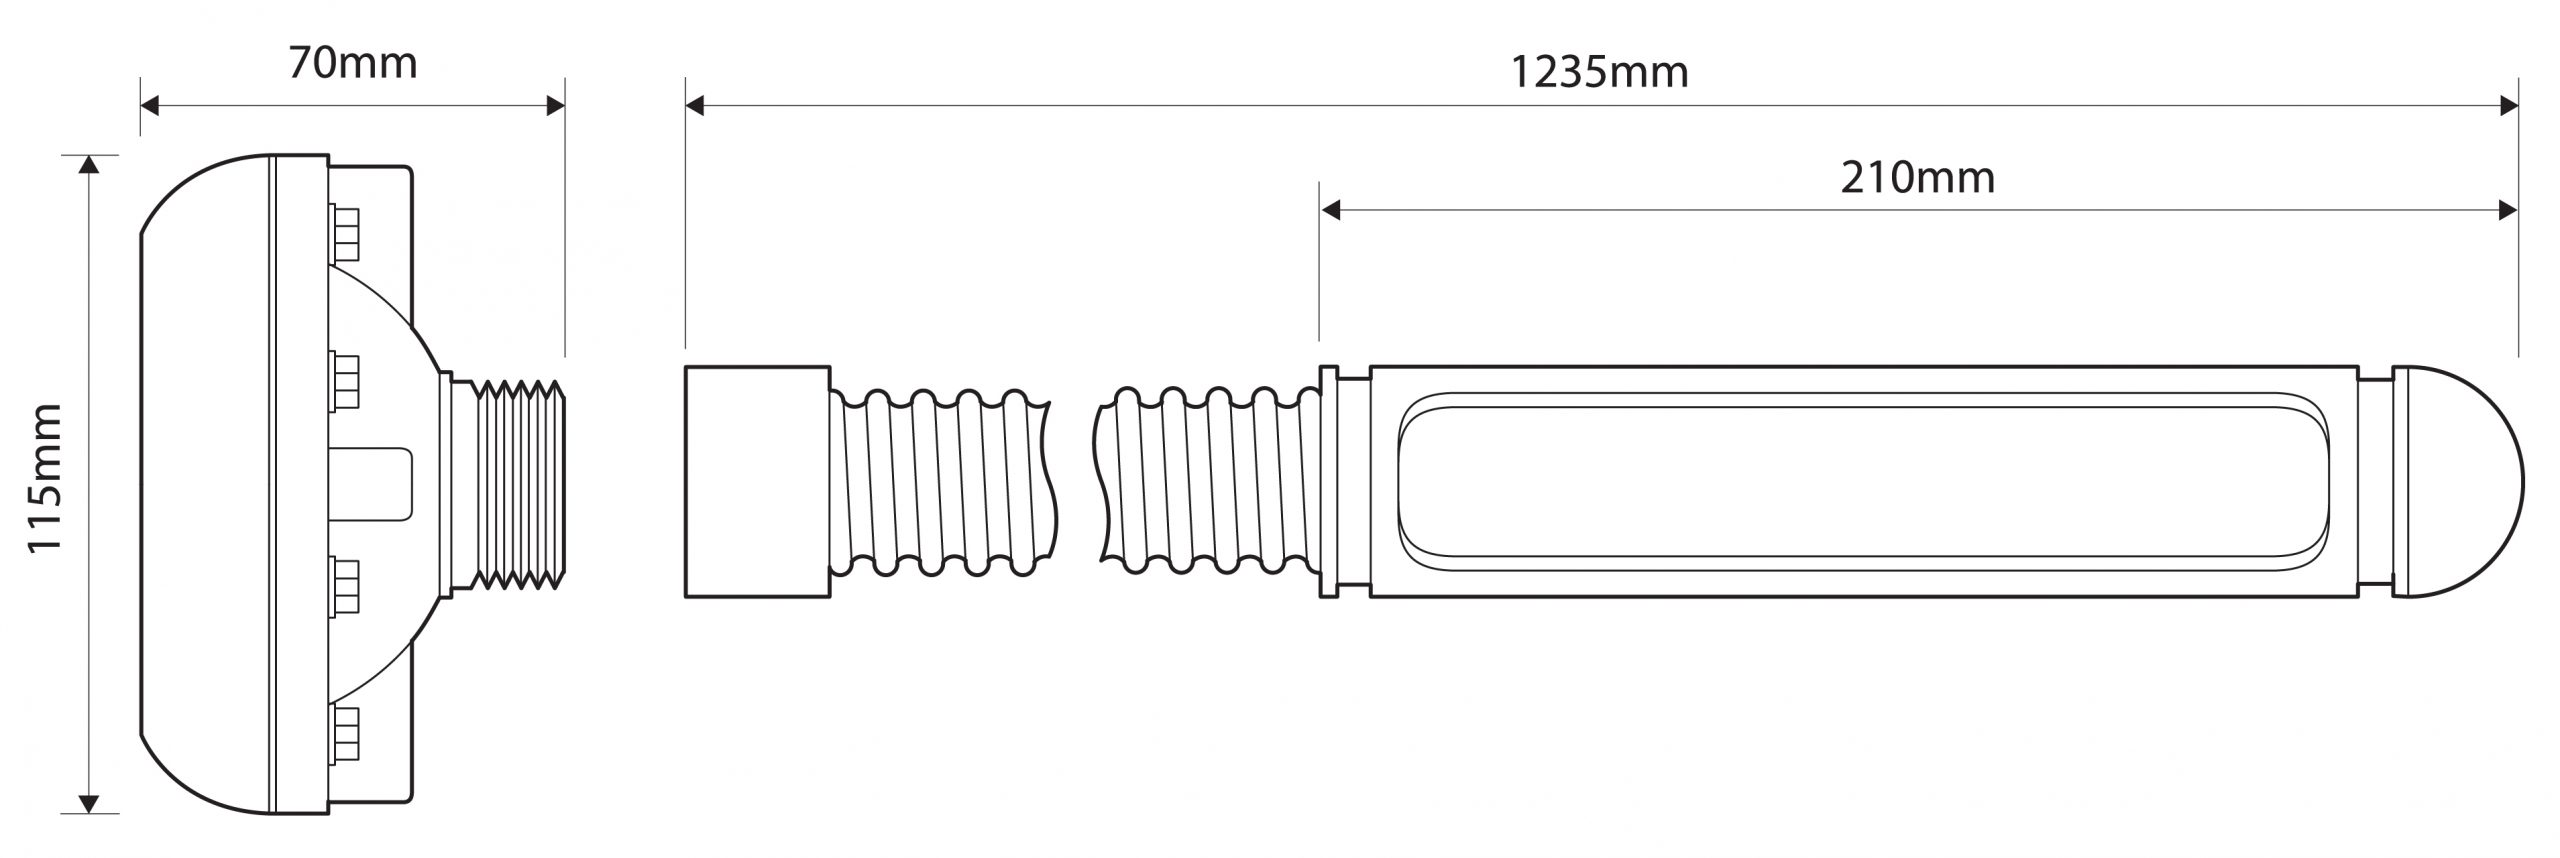 LSP-213 Siren Pipe Extension and Speaker Kit Dimensions Illustration Showing 1235mm/210mm Extension Length and 70mm Width and 115mm Height for Speaker